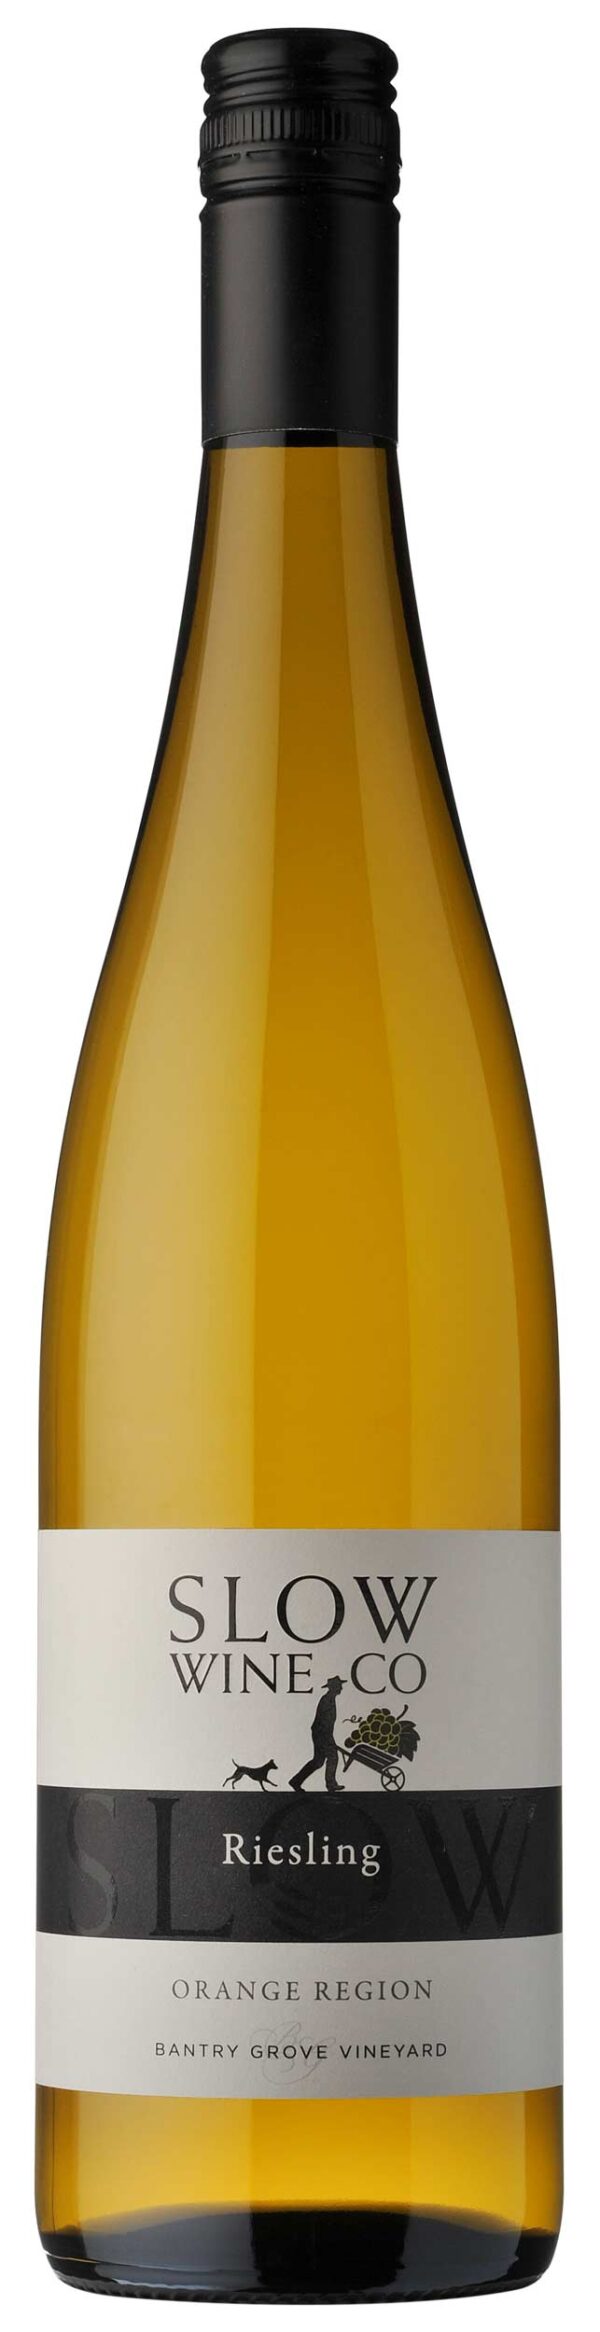 Slow Wine Co Riesling